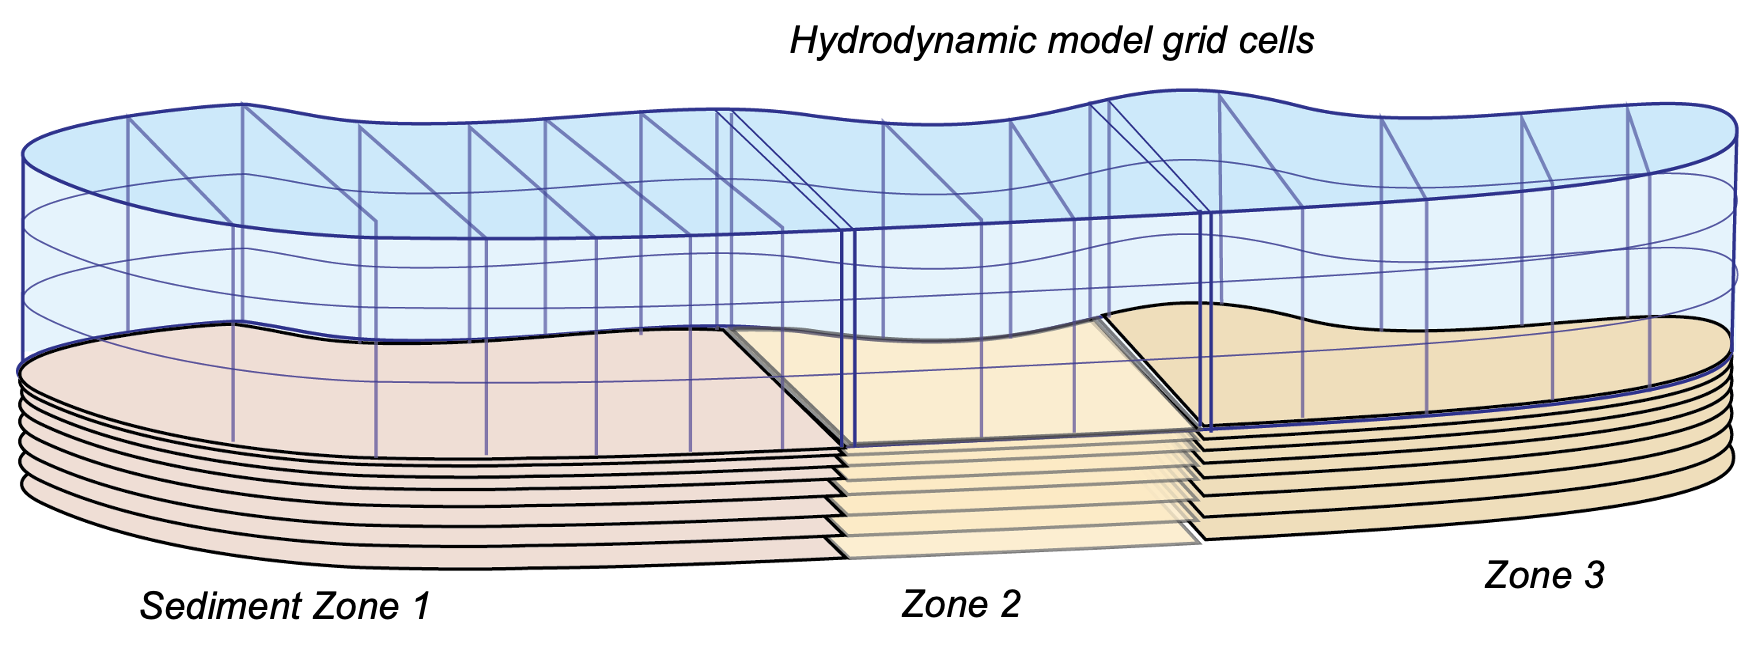 Schematic depicting sediment zone numerical approach.